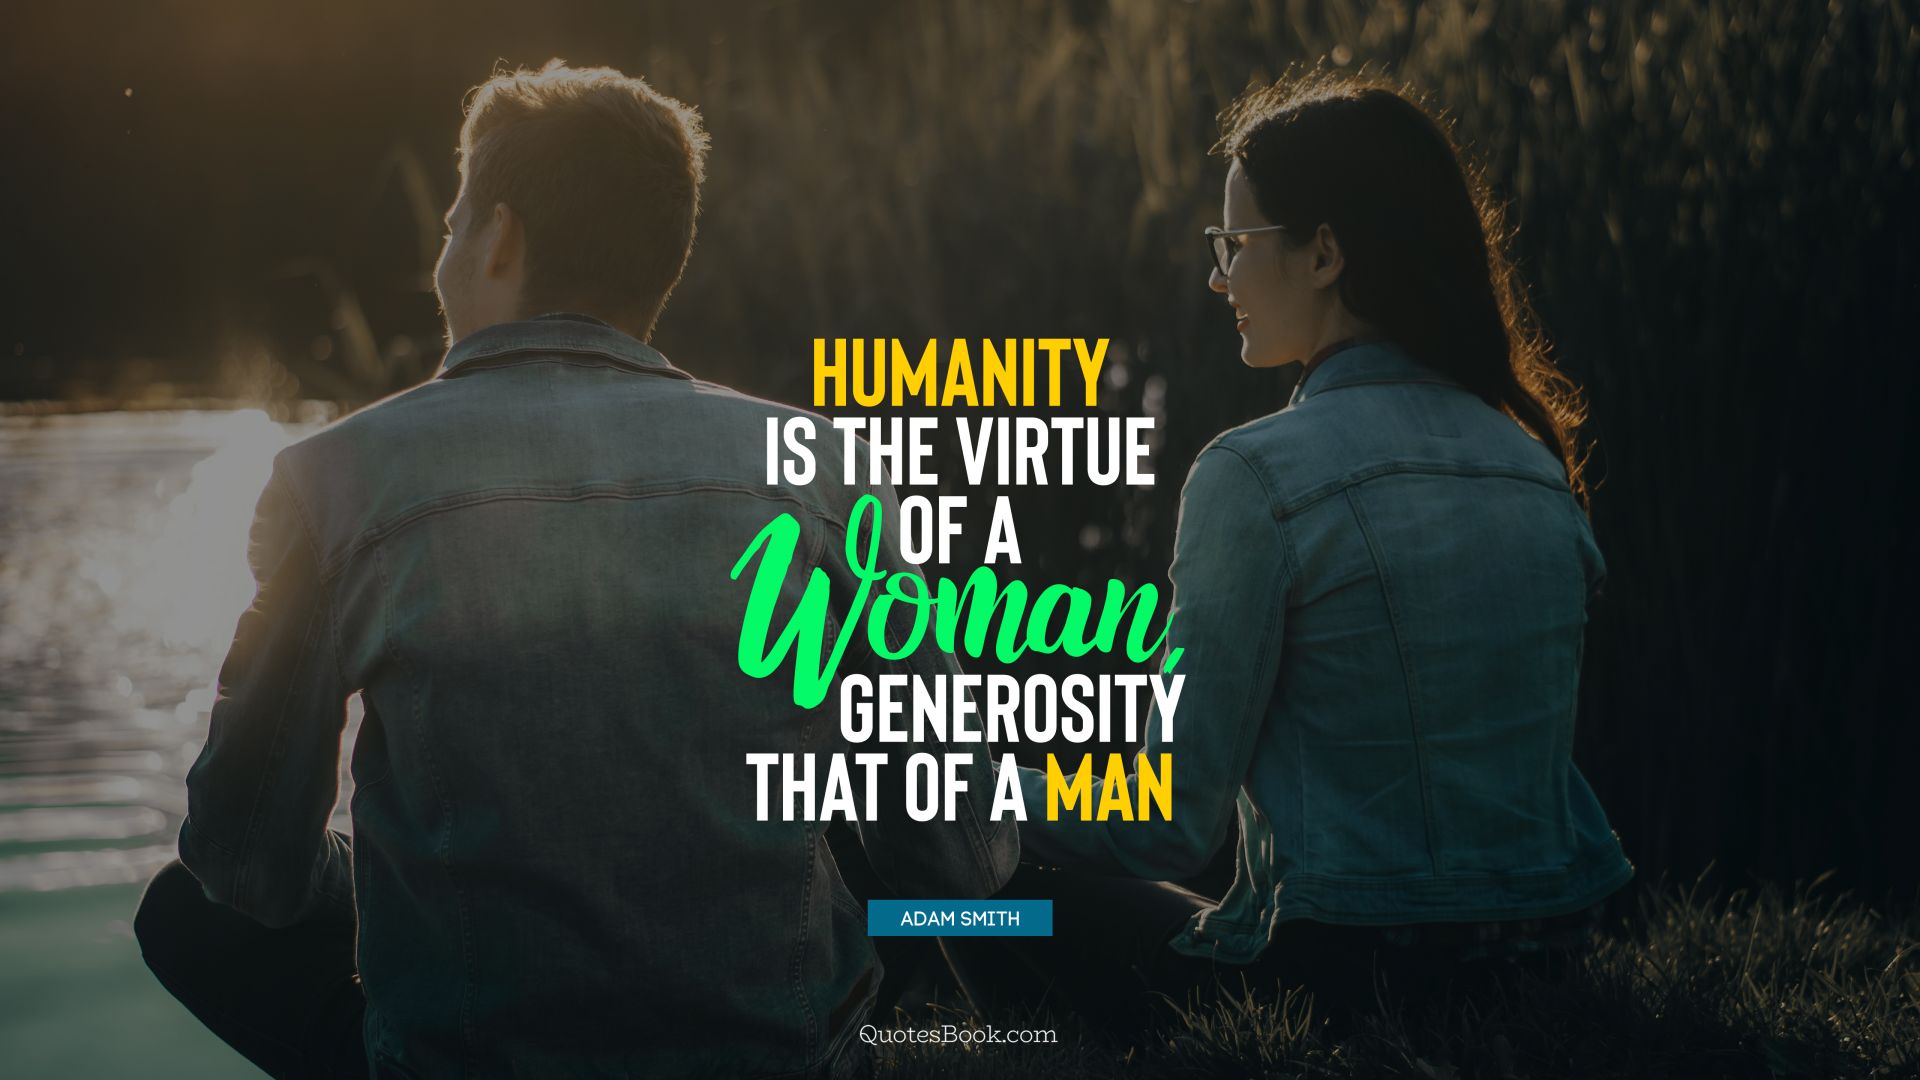 Humanity is the virtue of a woman, generosity that of a man. - Quote by Adam Smith